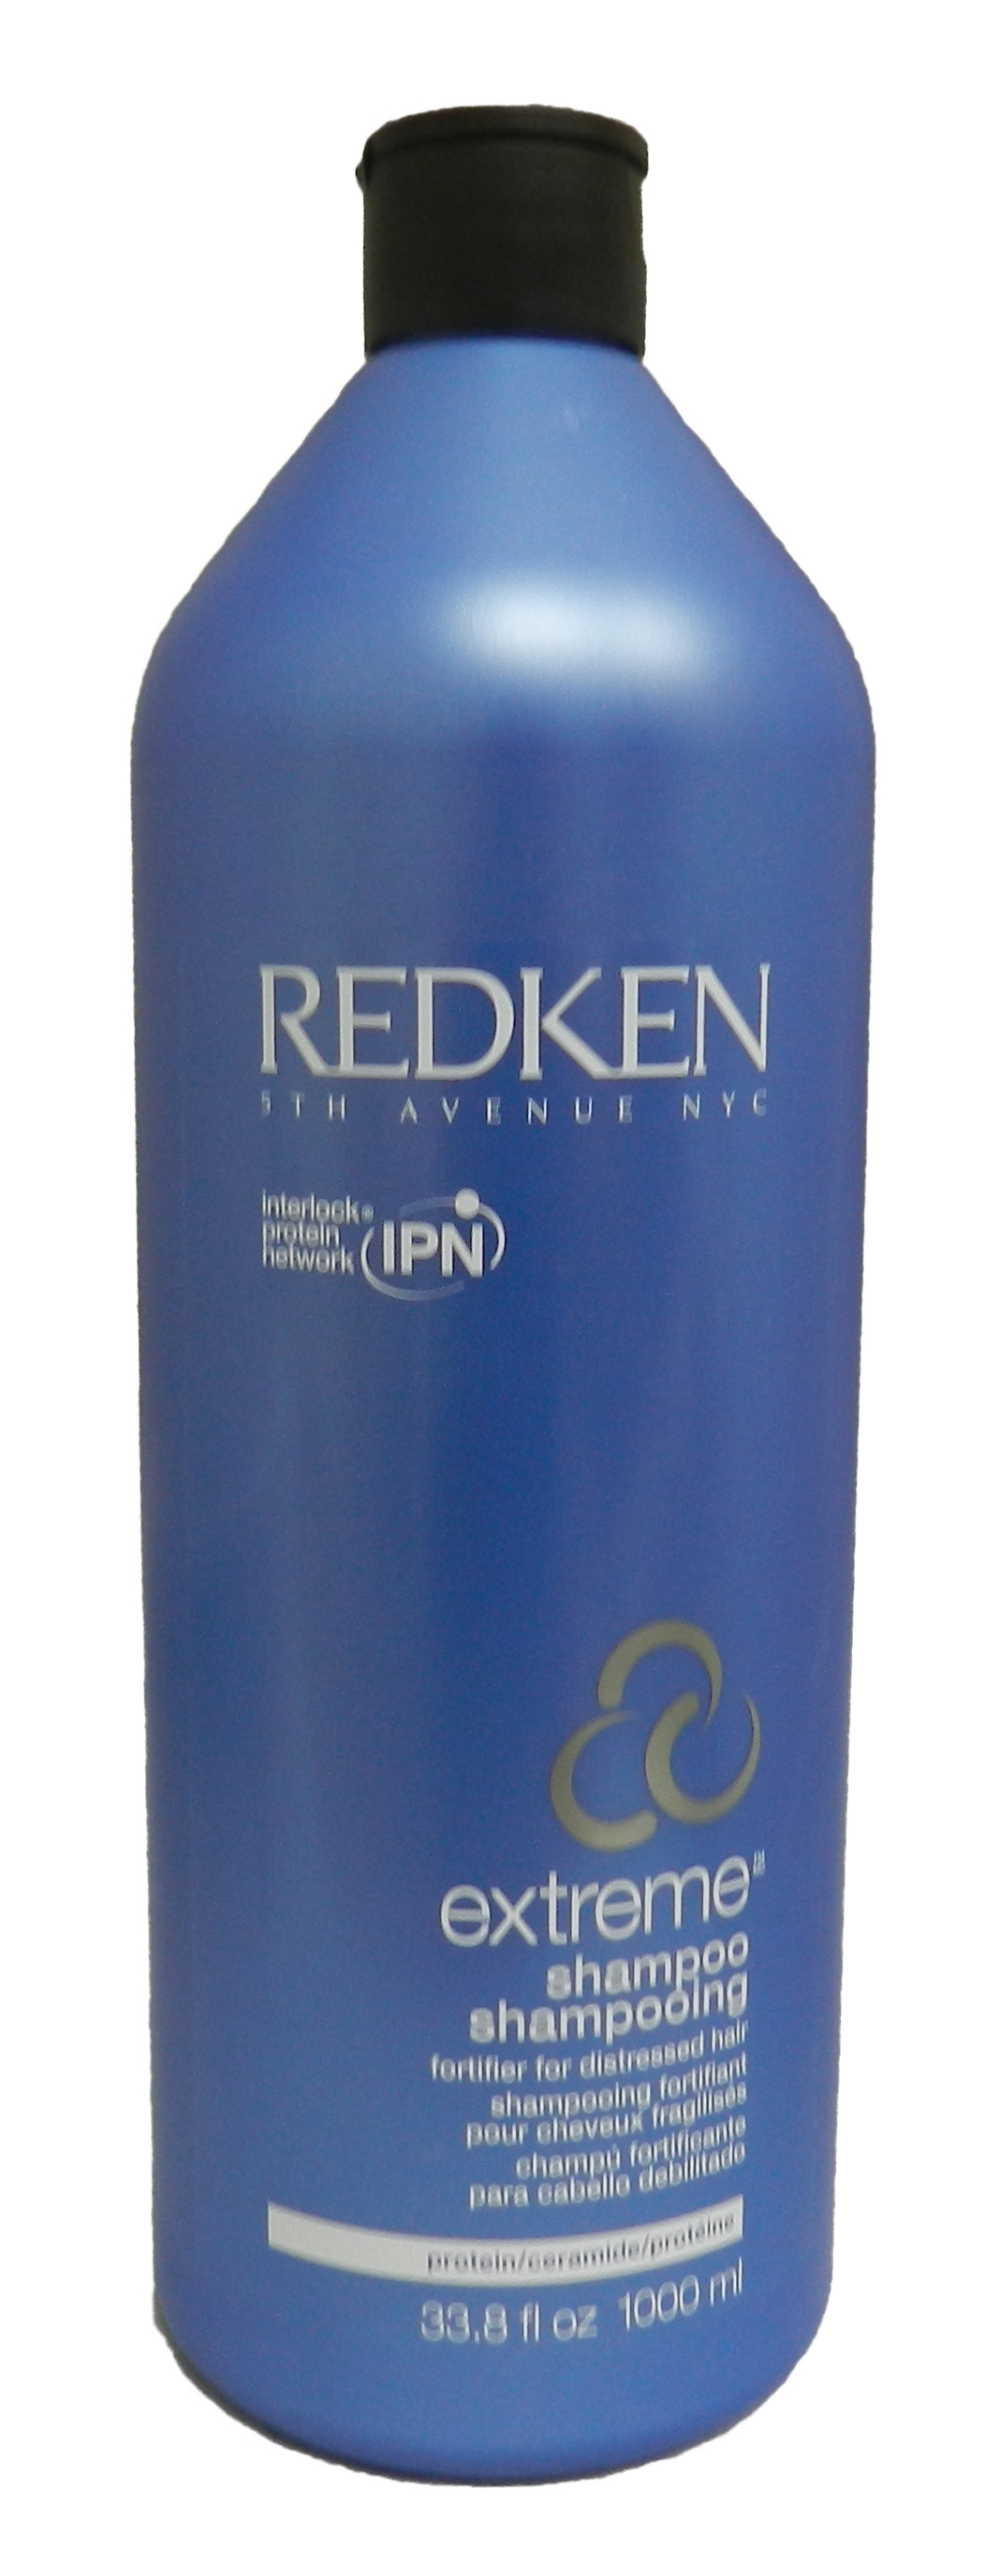 0884486210876 - EXTREME SHAMPOO FOR DISTRESSED HAIR 1L REDKEN